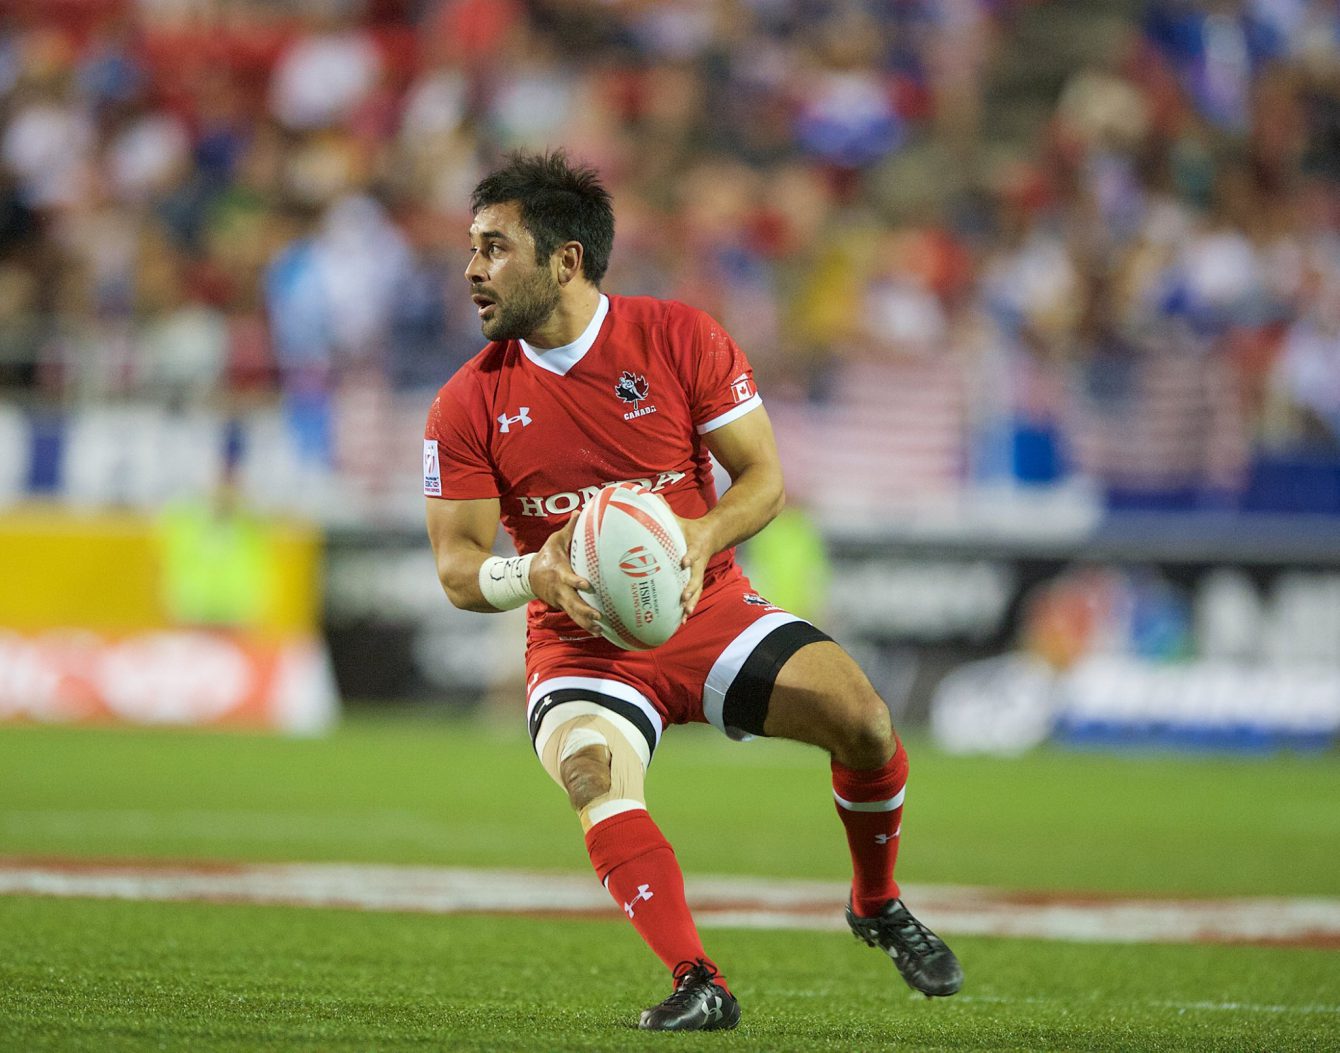 Phil Mack pictured at London Sevens 2016 (Photo: Rugby Canada).